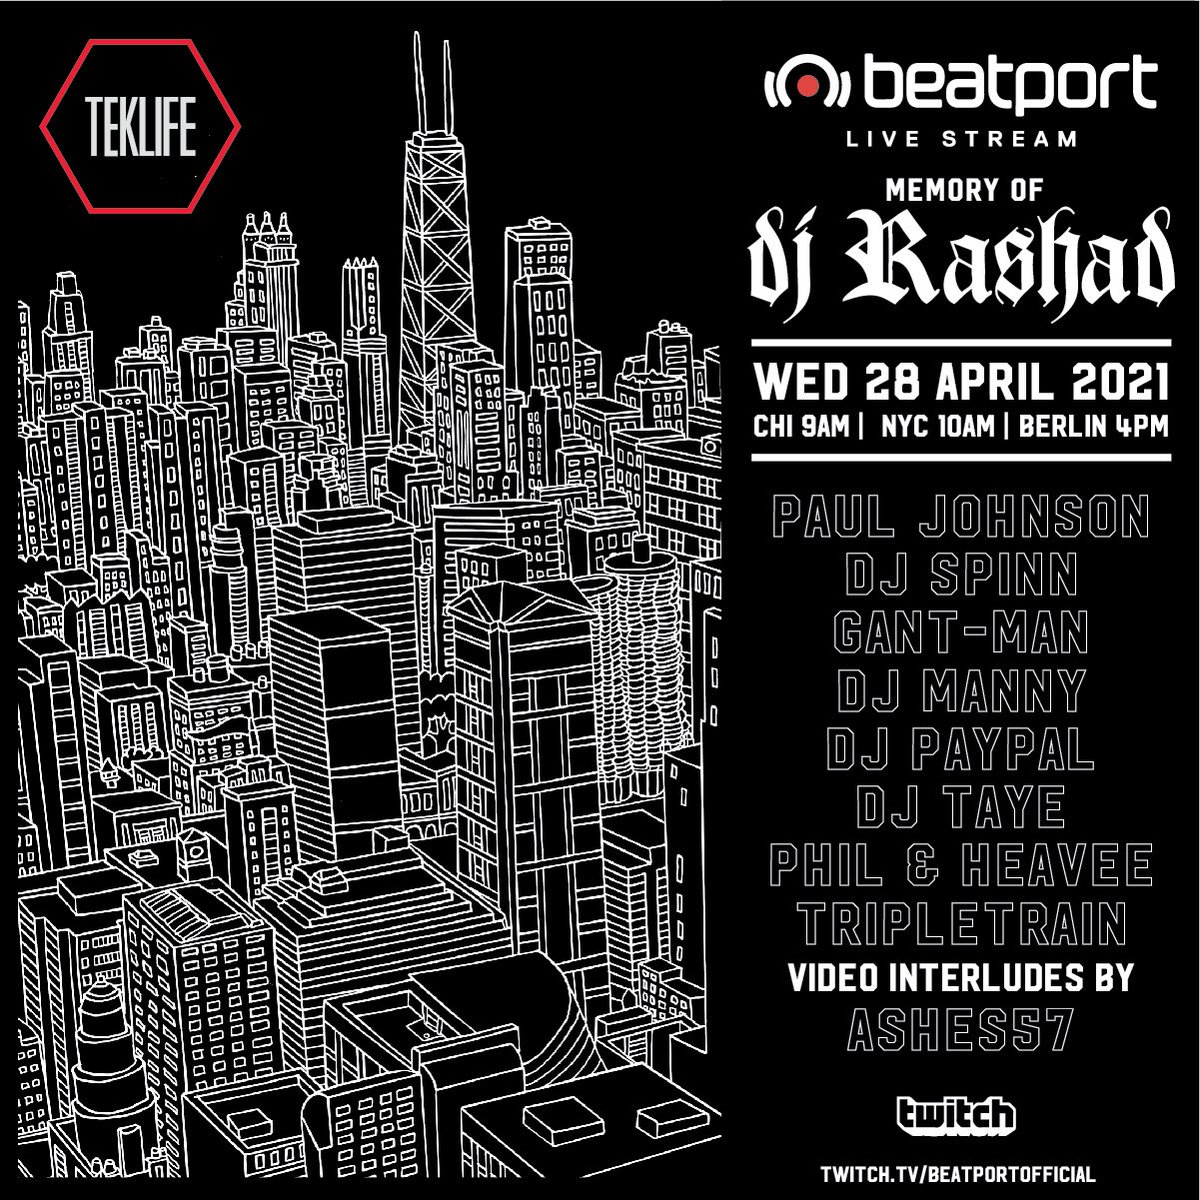 Yo! What’s up all the #GhettoHouse #JukeMusic & #ChicagoFootwork lovers around the world! Check out the playback of @teklife57 x @beatport #DJRashad Tribute via @YouTube Link here: 👉🏼 youtu.be/_UR3X0s7JZU?t=… #RIPDJRashad #TekLife #Chicago #NYC #LA #London #Paris #Berlin #Japan